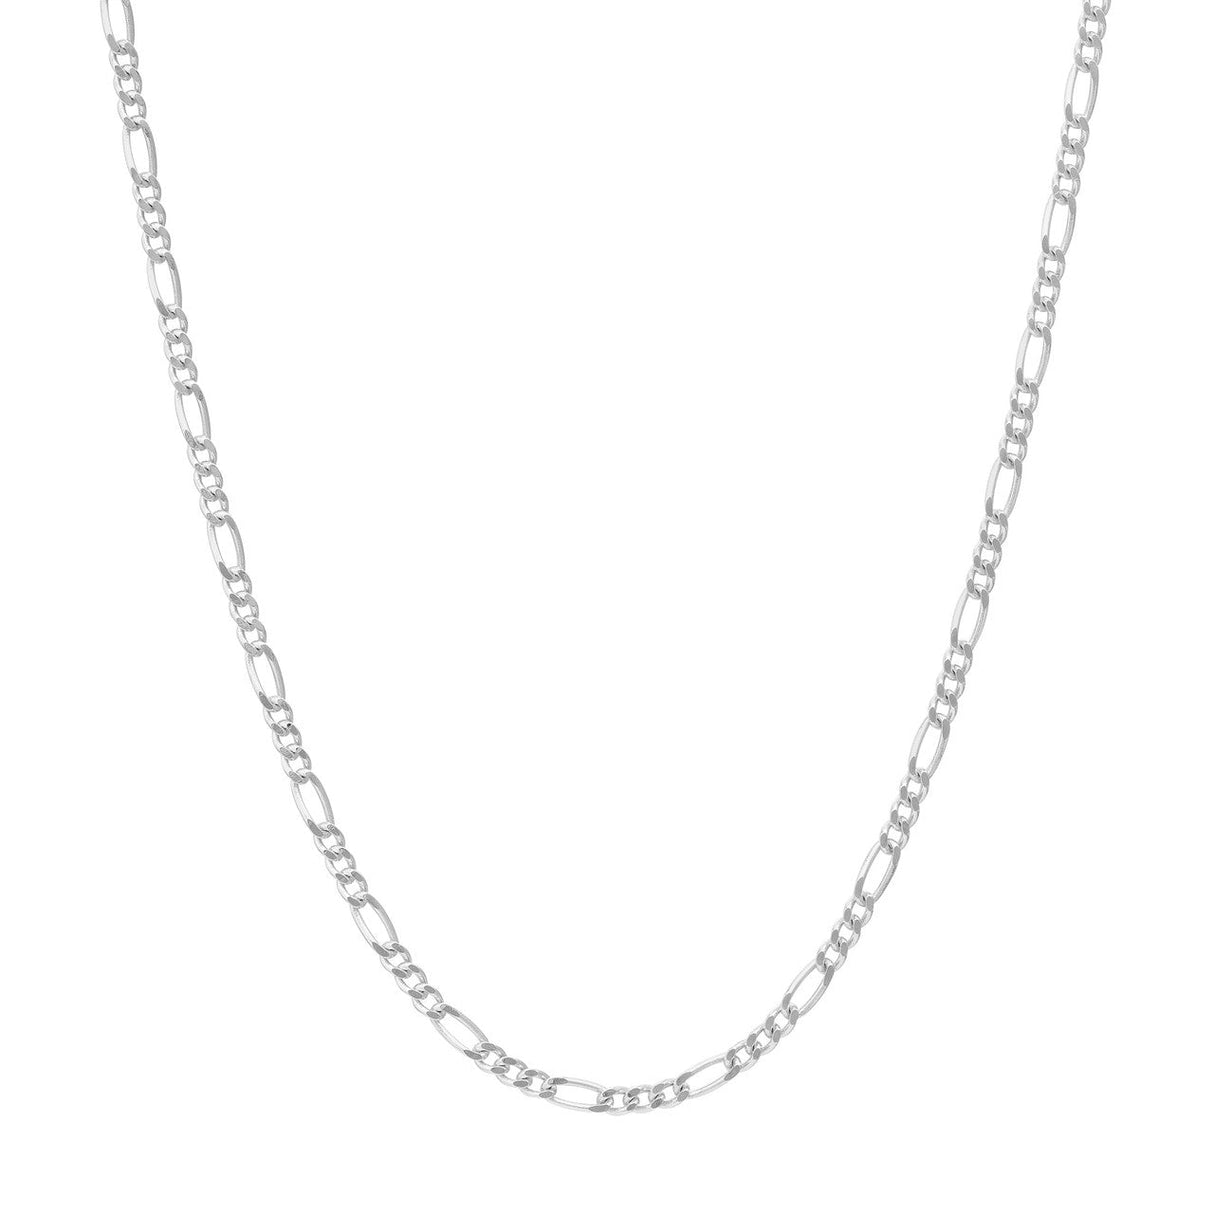 14K Gold Chain, 16", 1.30mm Figaro Chain with Spring Ring, Gold Layered Chain, Gold Necklaces - Diamond Origin